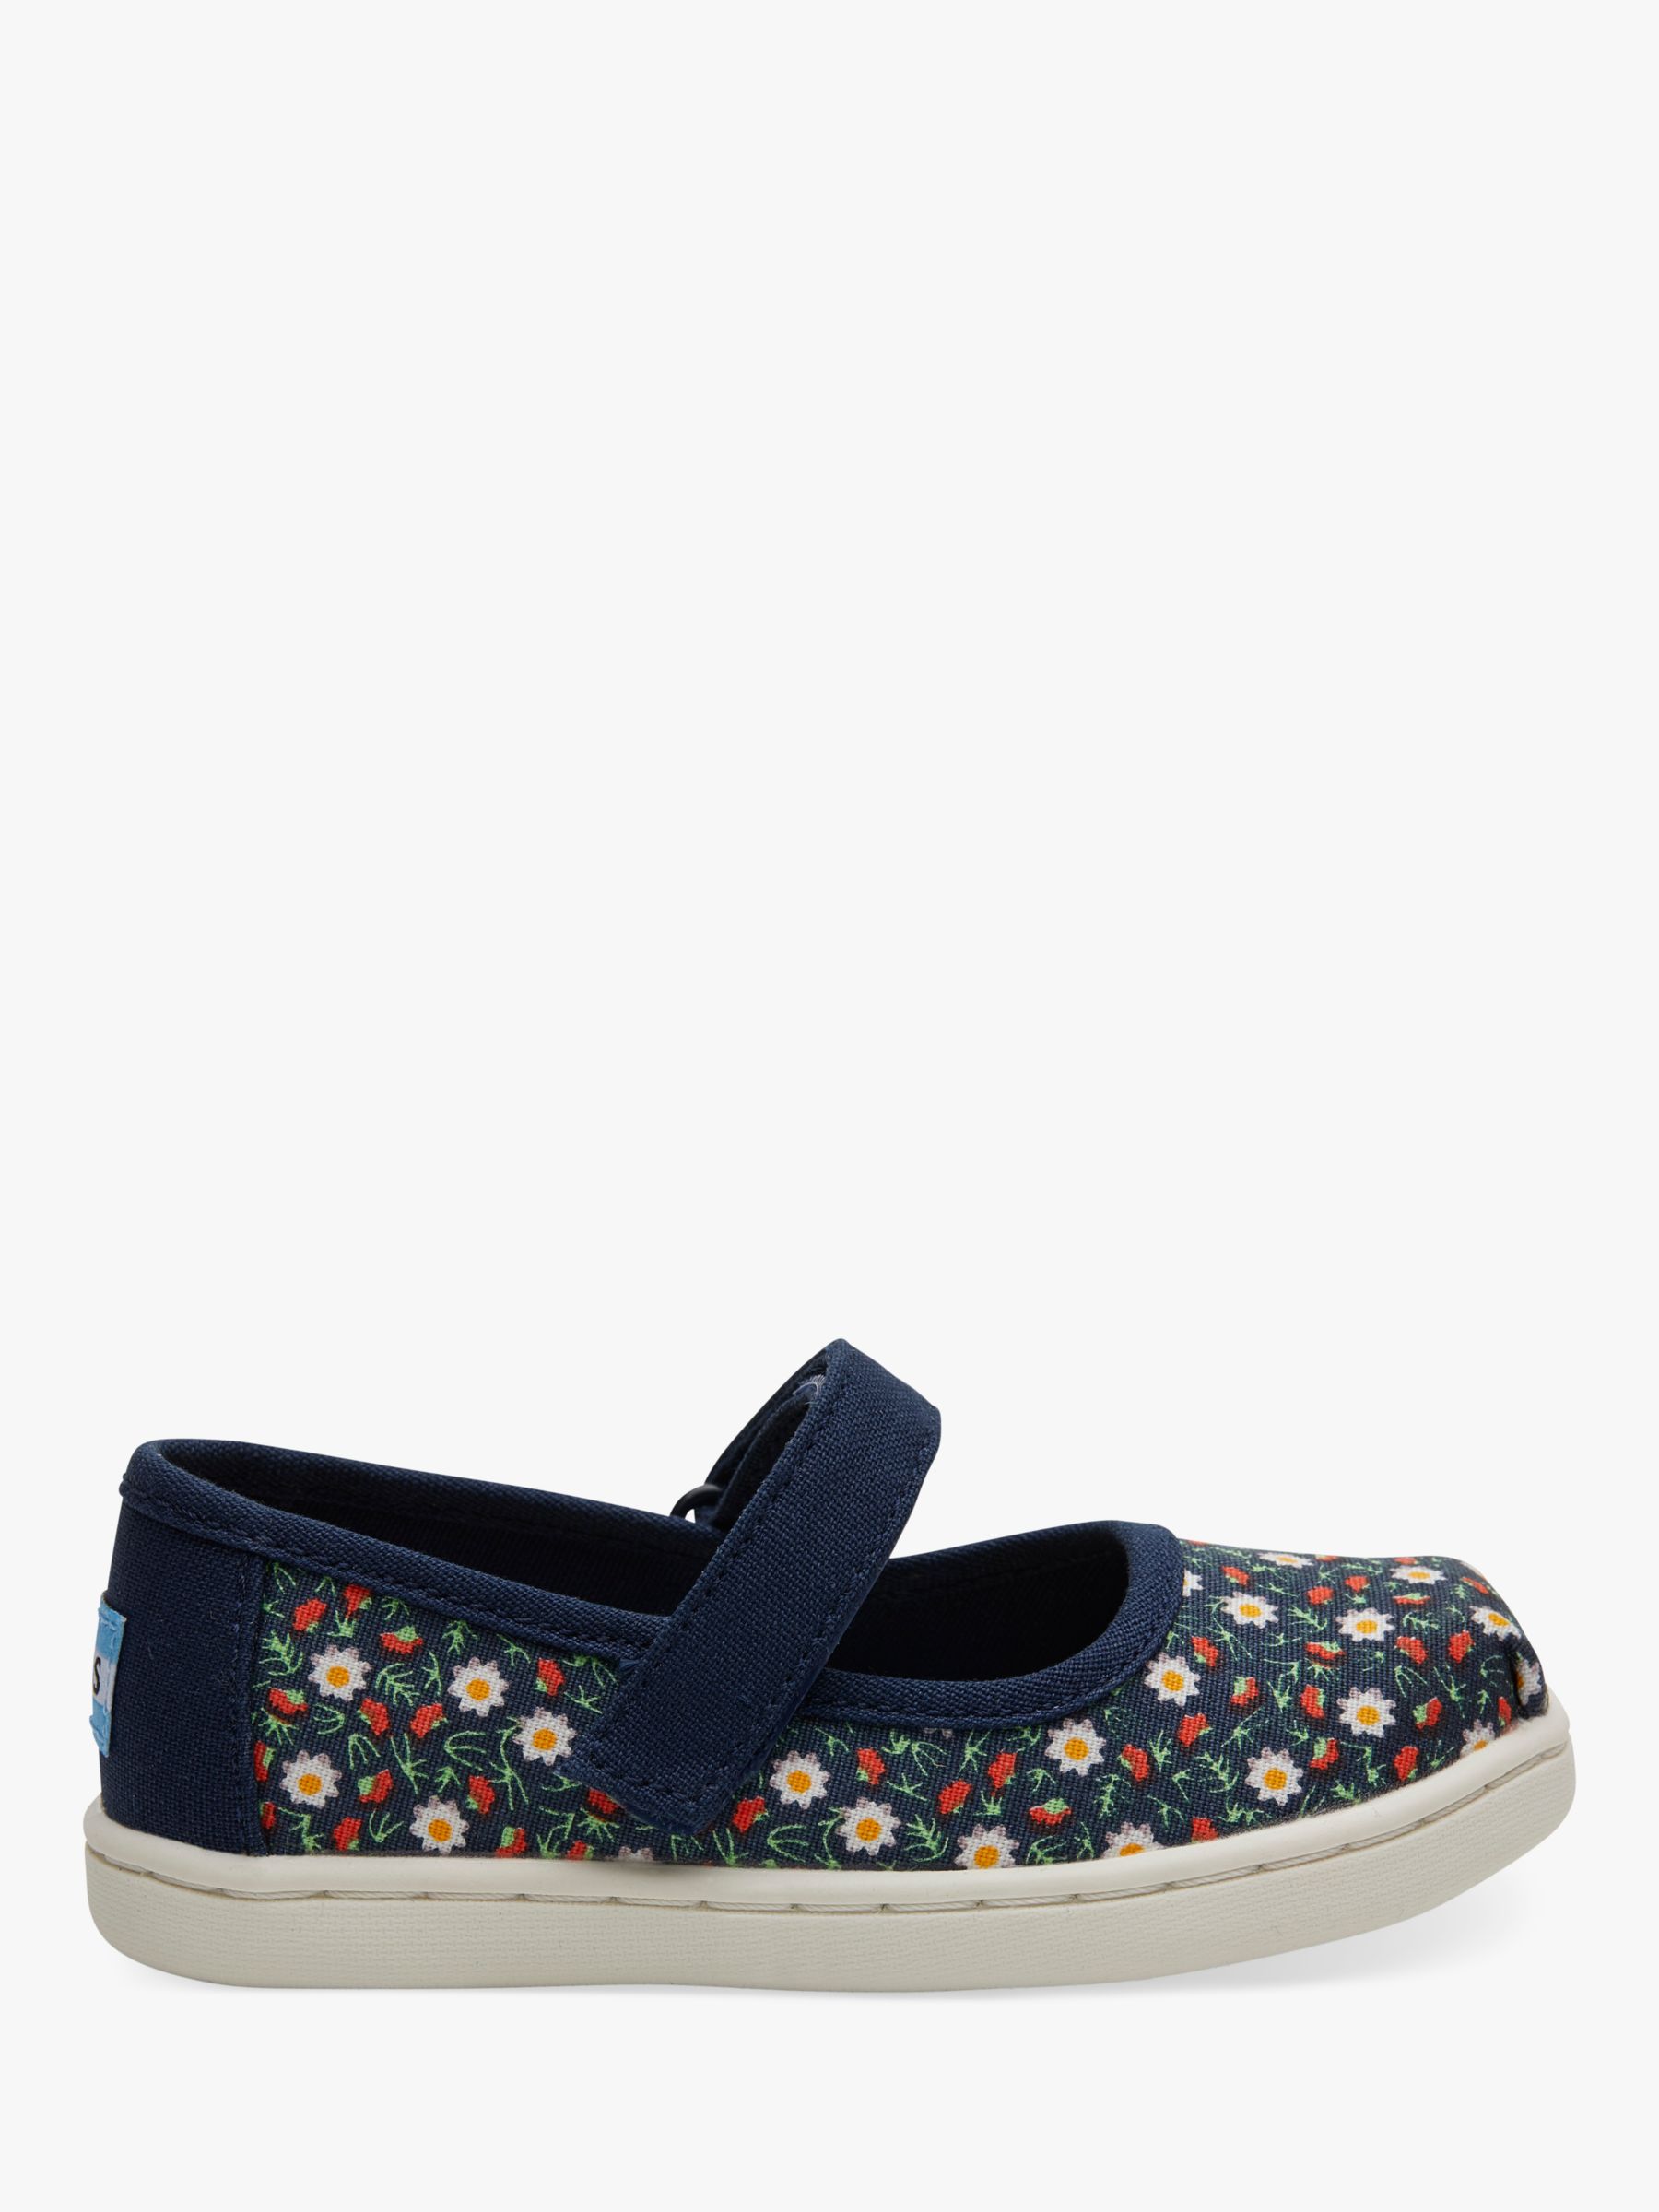 TOMS Children's Mary Jane Ditsy Floral Riptape Shoes, Navy